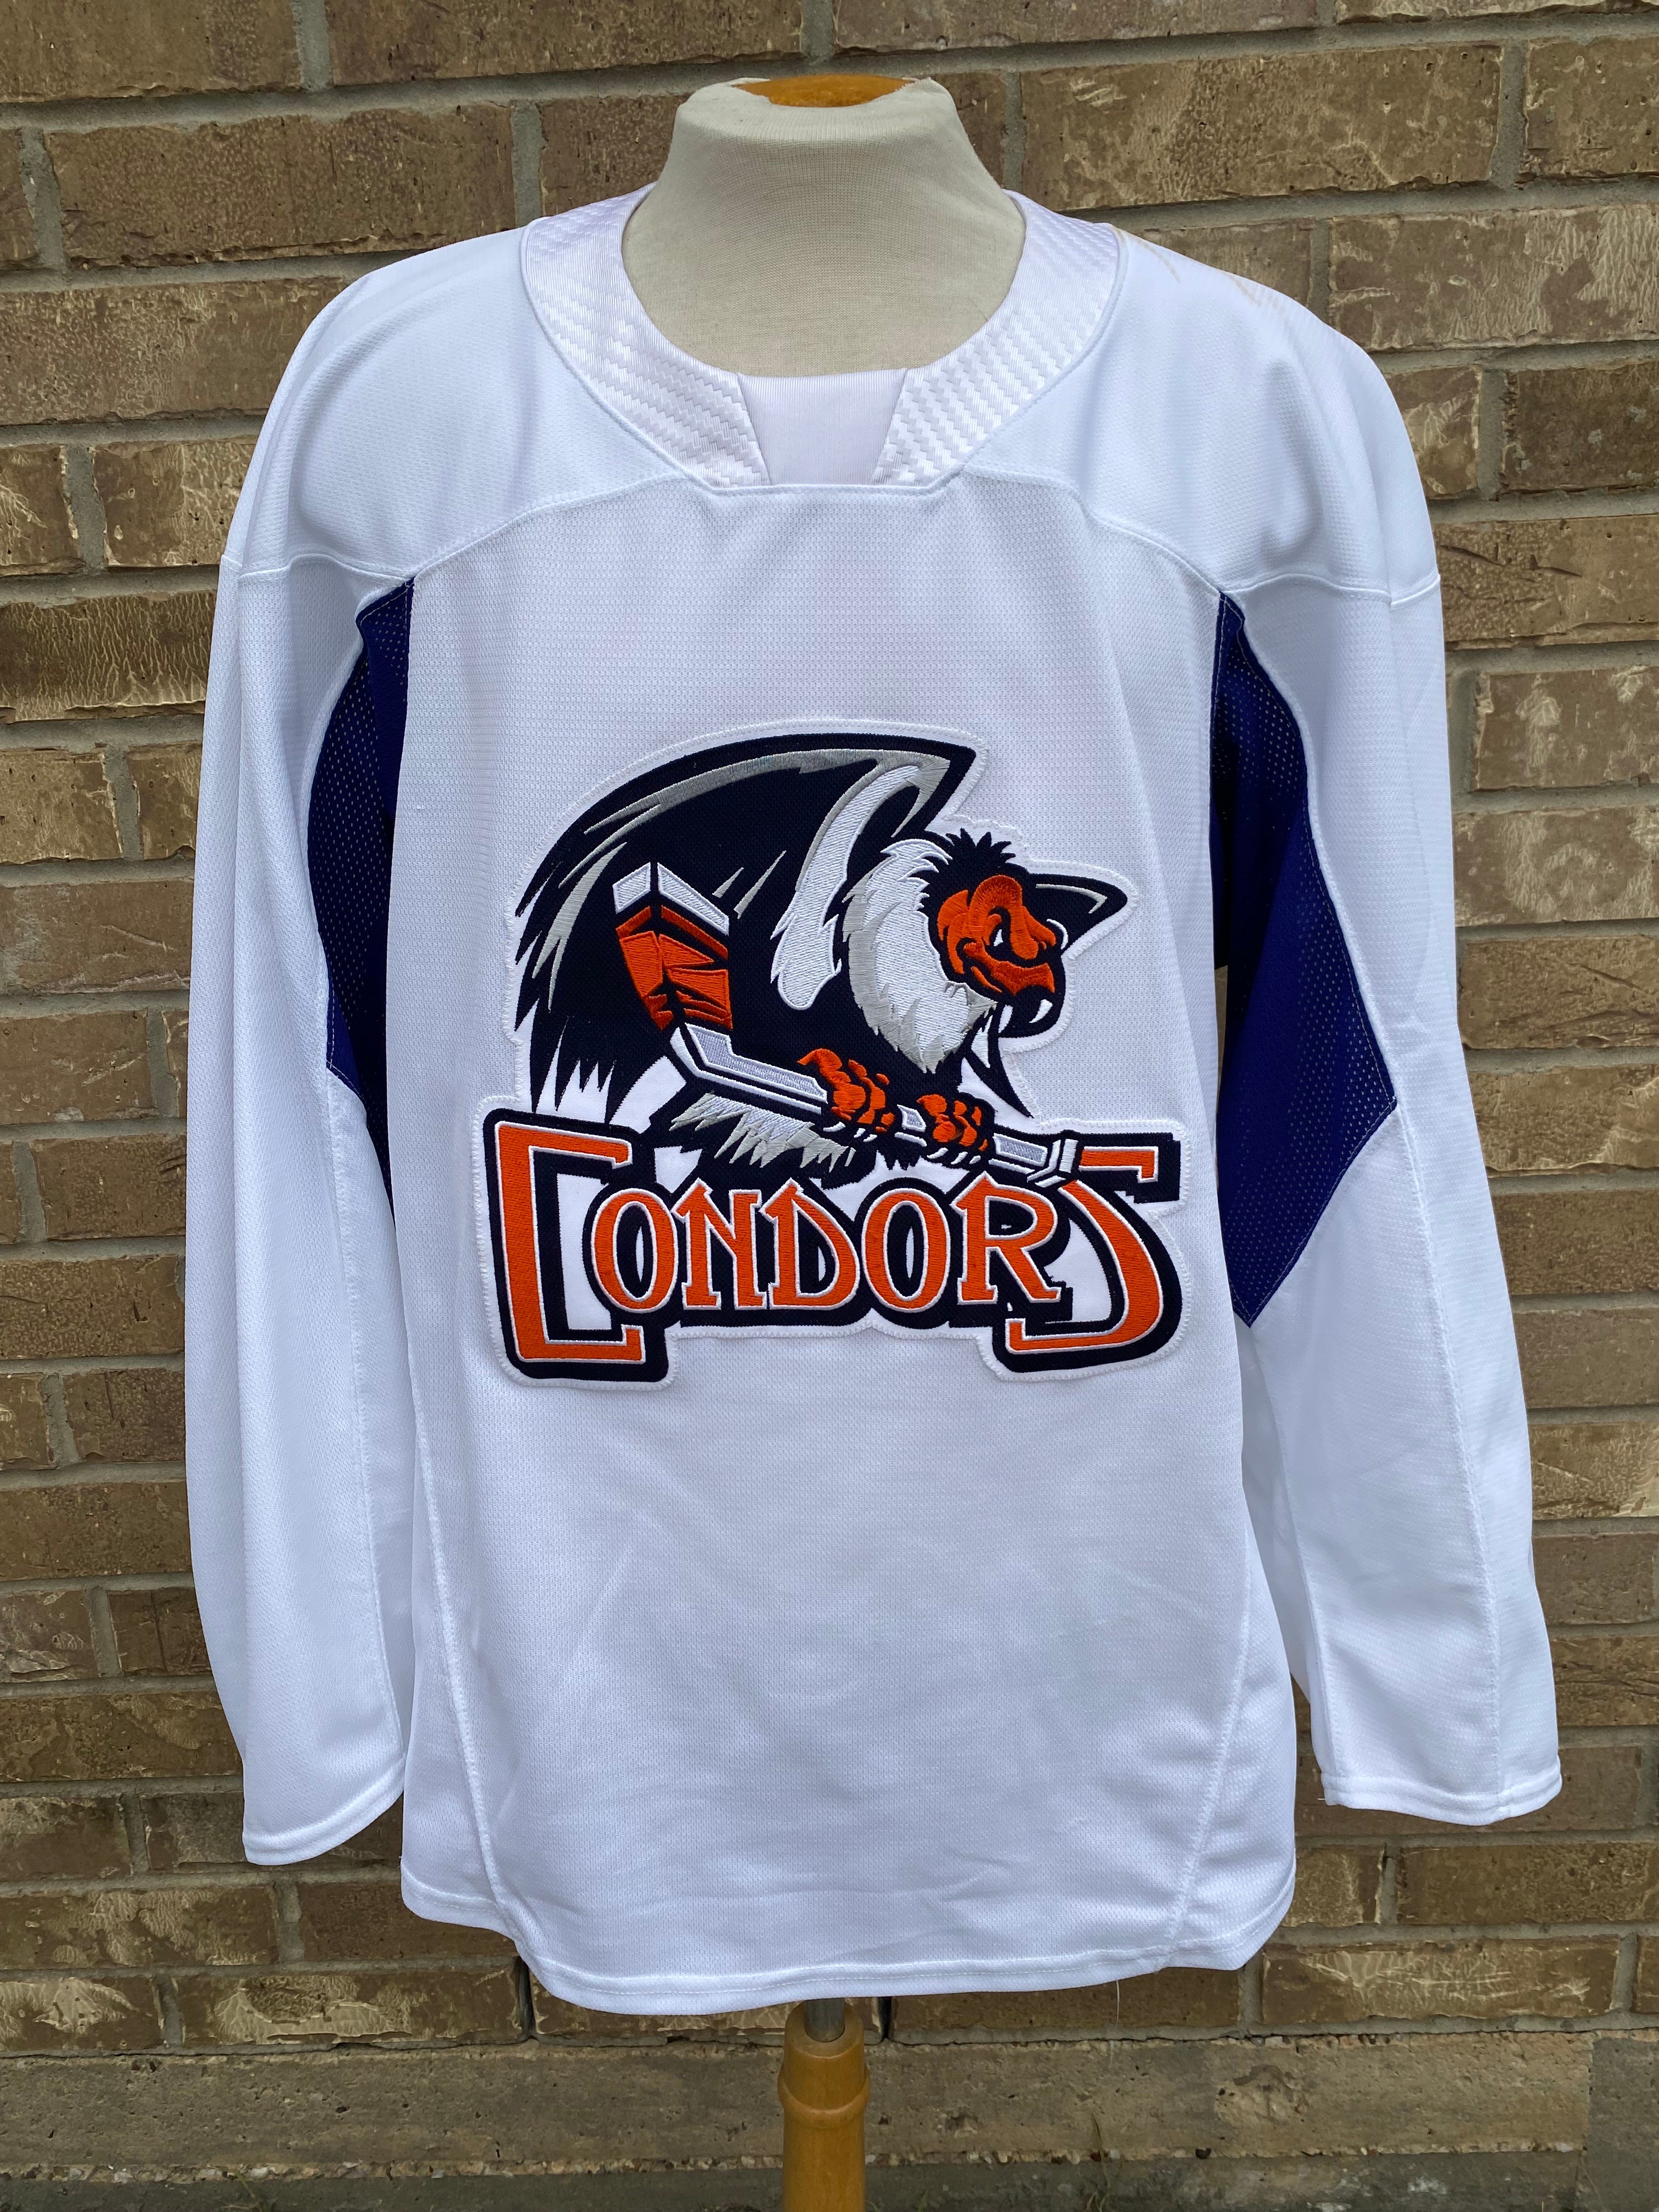 Been wanting a Bakersfield Condors jersey for a while now and so